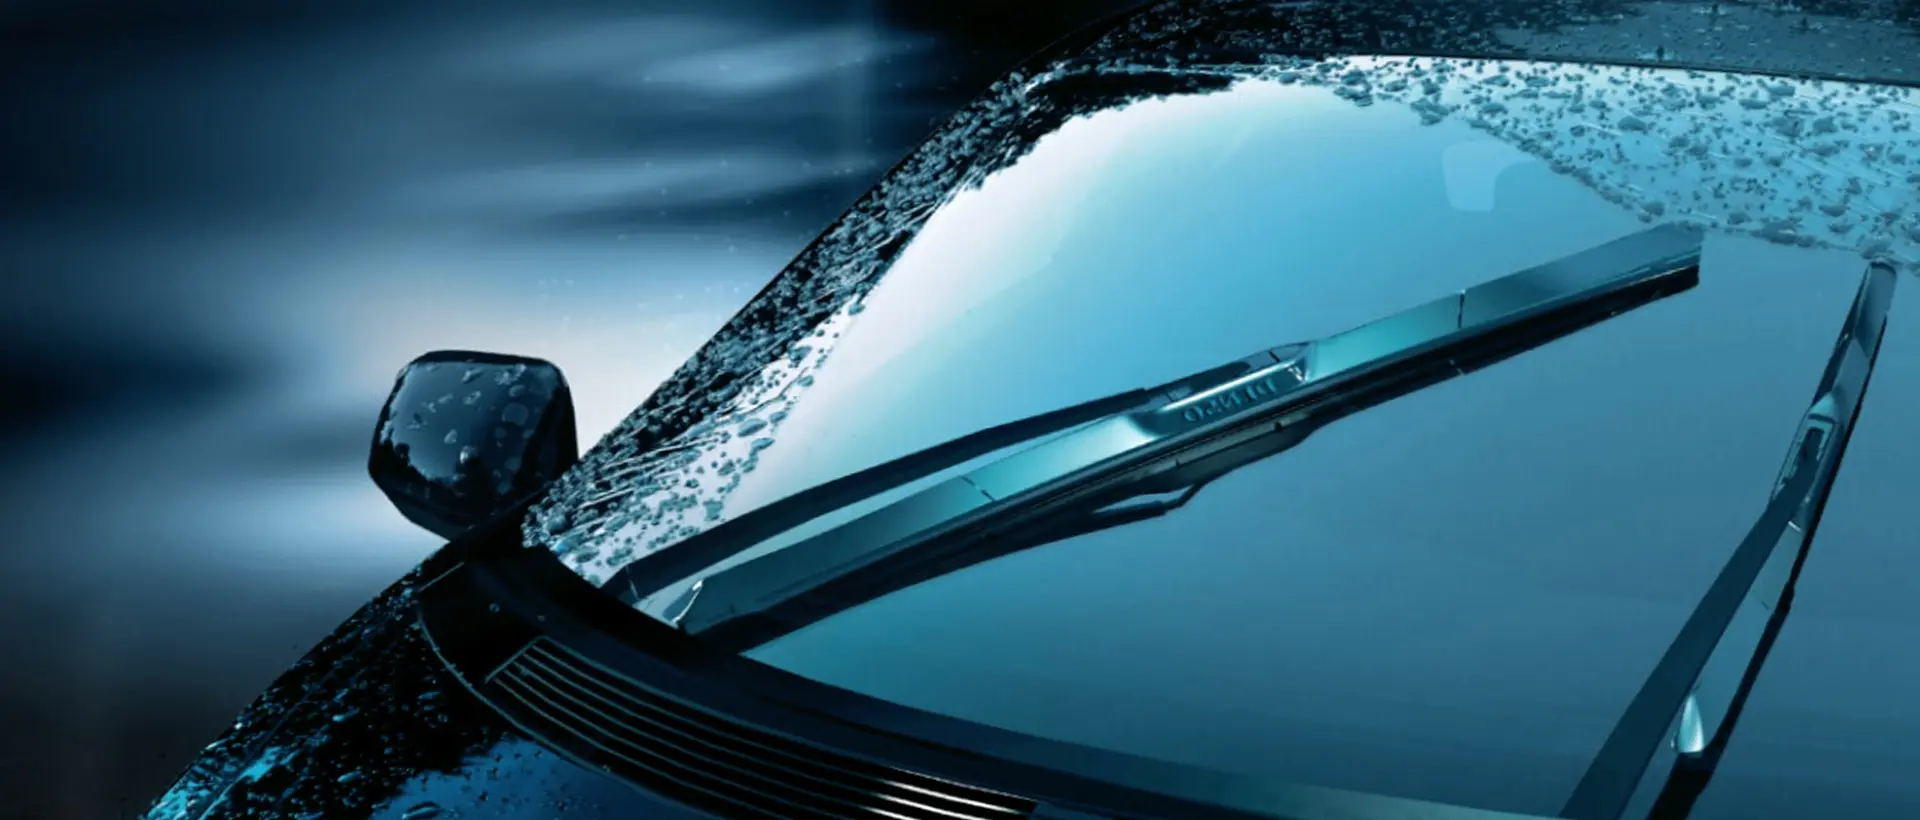 Flat wiper blades are designed to maintain consistent contact with the windshield